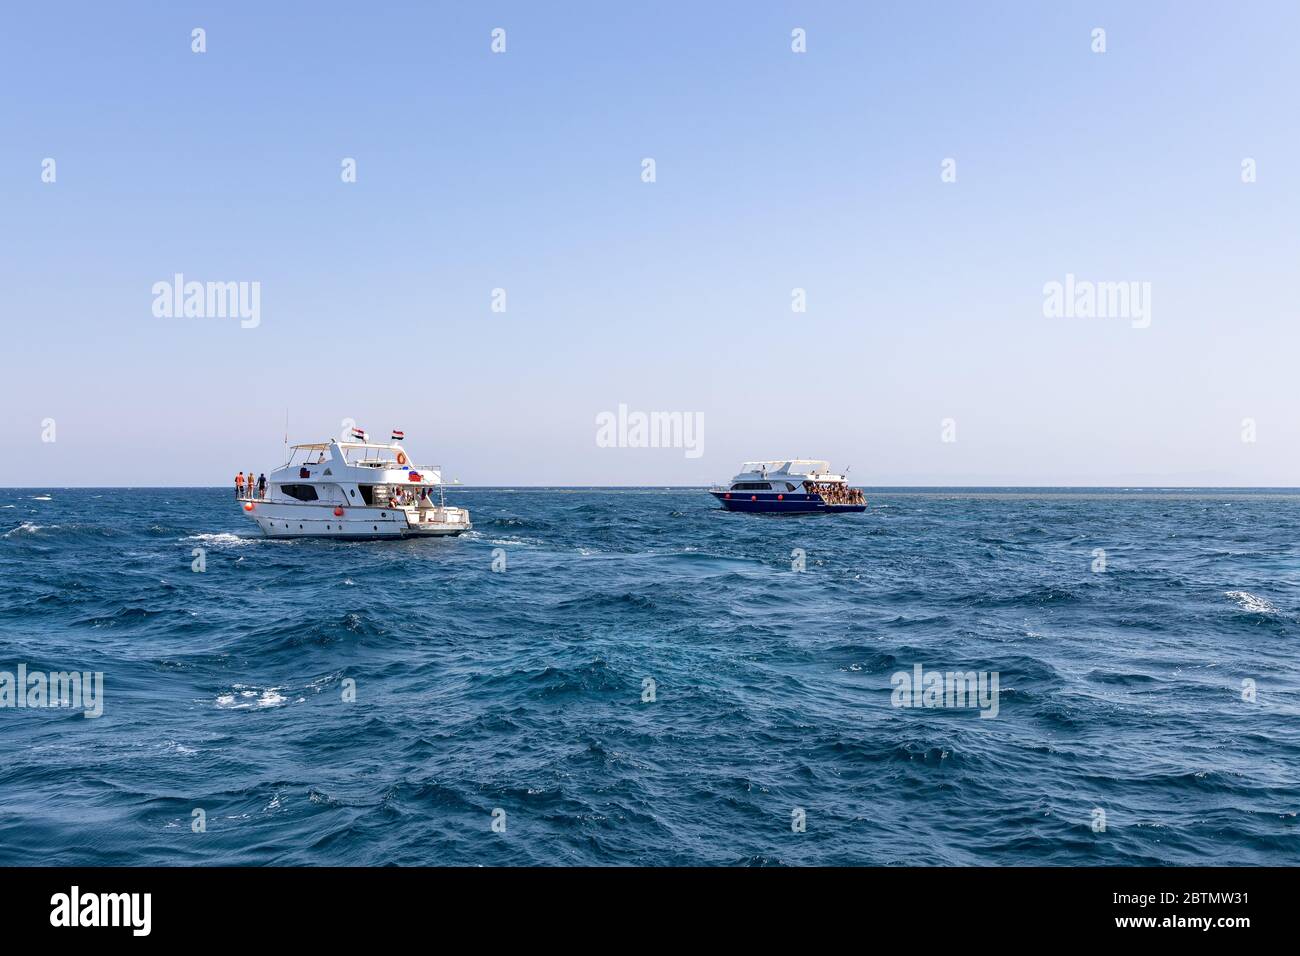 Hurghada, Egypt - september 17, 2019: Unknown people on white yacht watching dolphins in the Red sea, Jaz 'ir Jift n Stock Photo